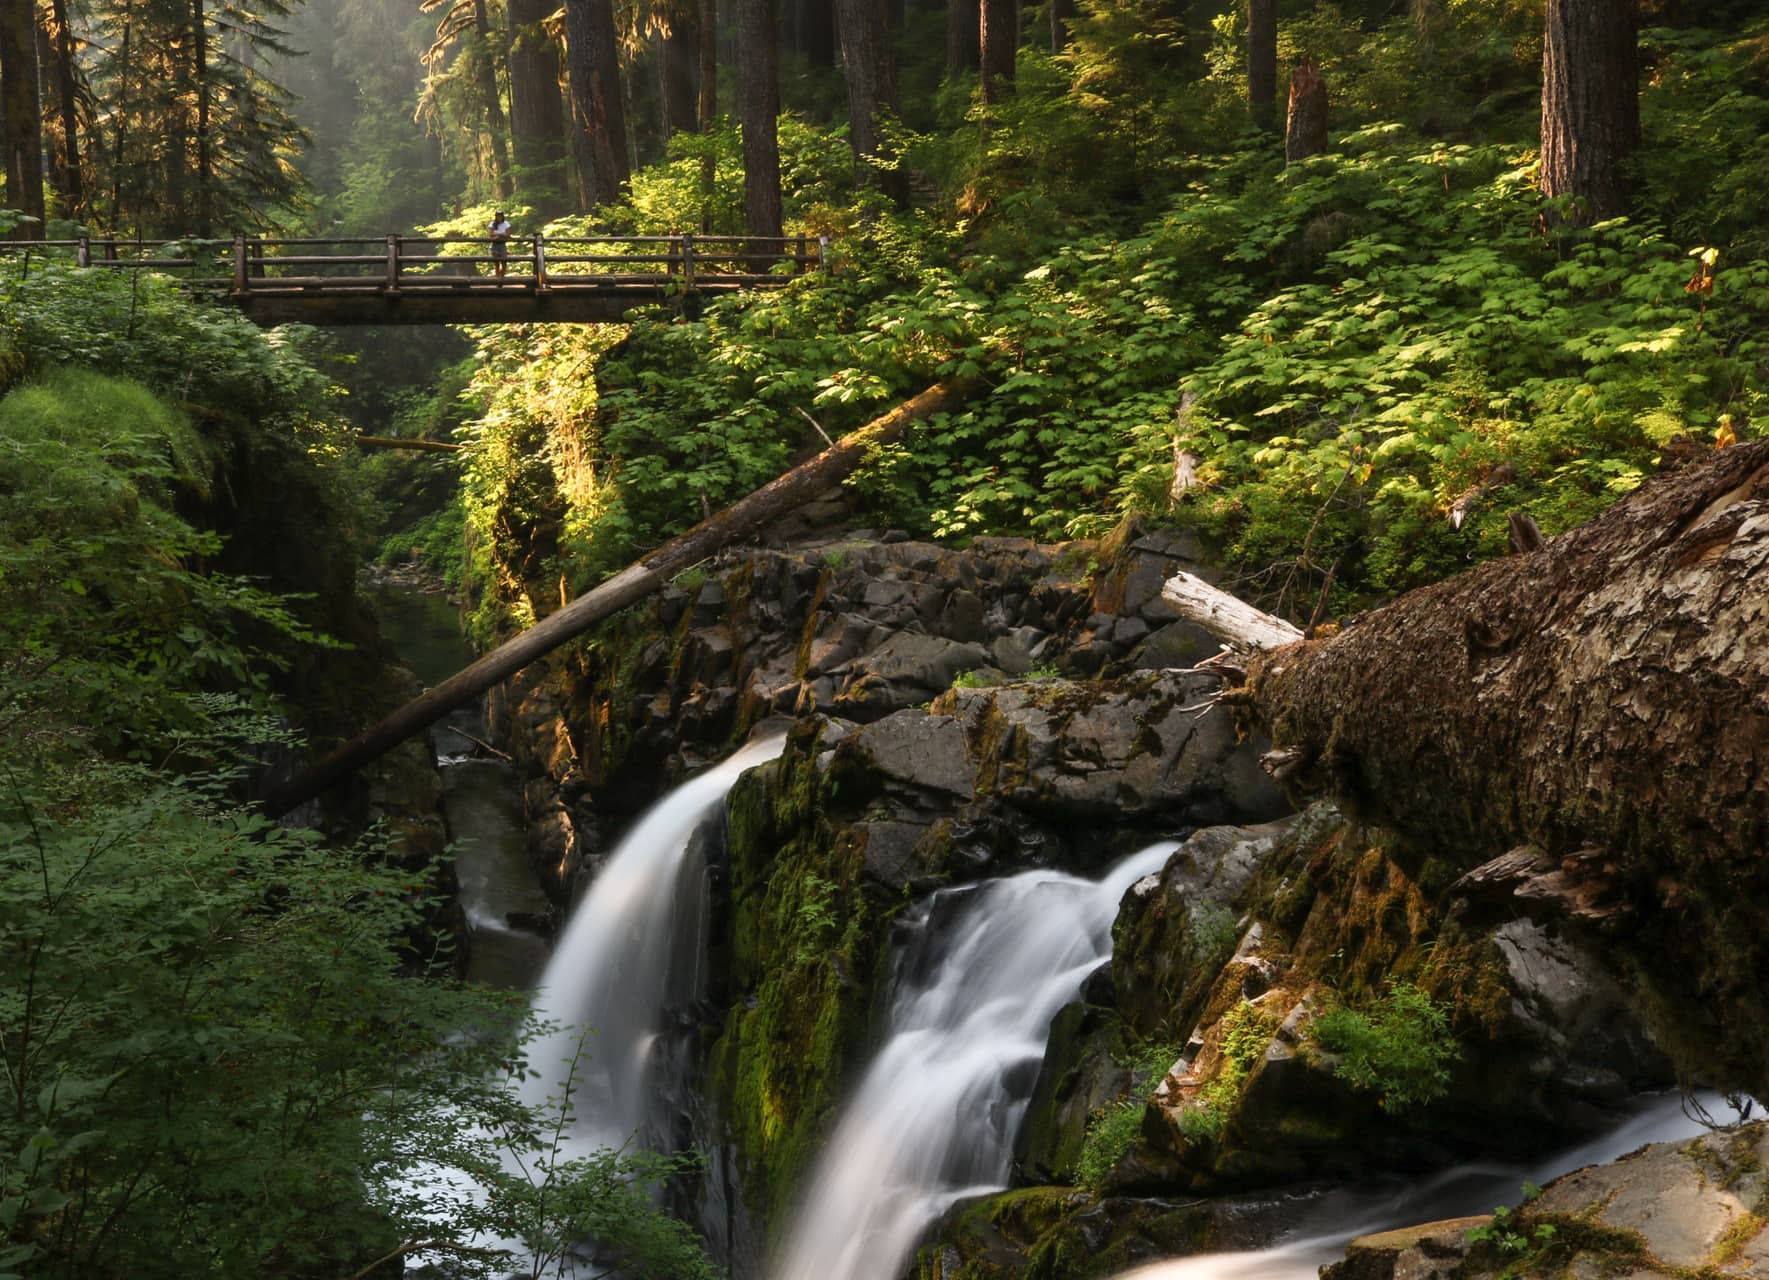 Sol Duc Falls in Olympic National Park, Washington, a beautiful UNESCO World Heritage Site